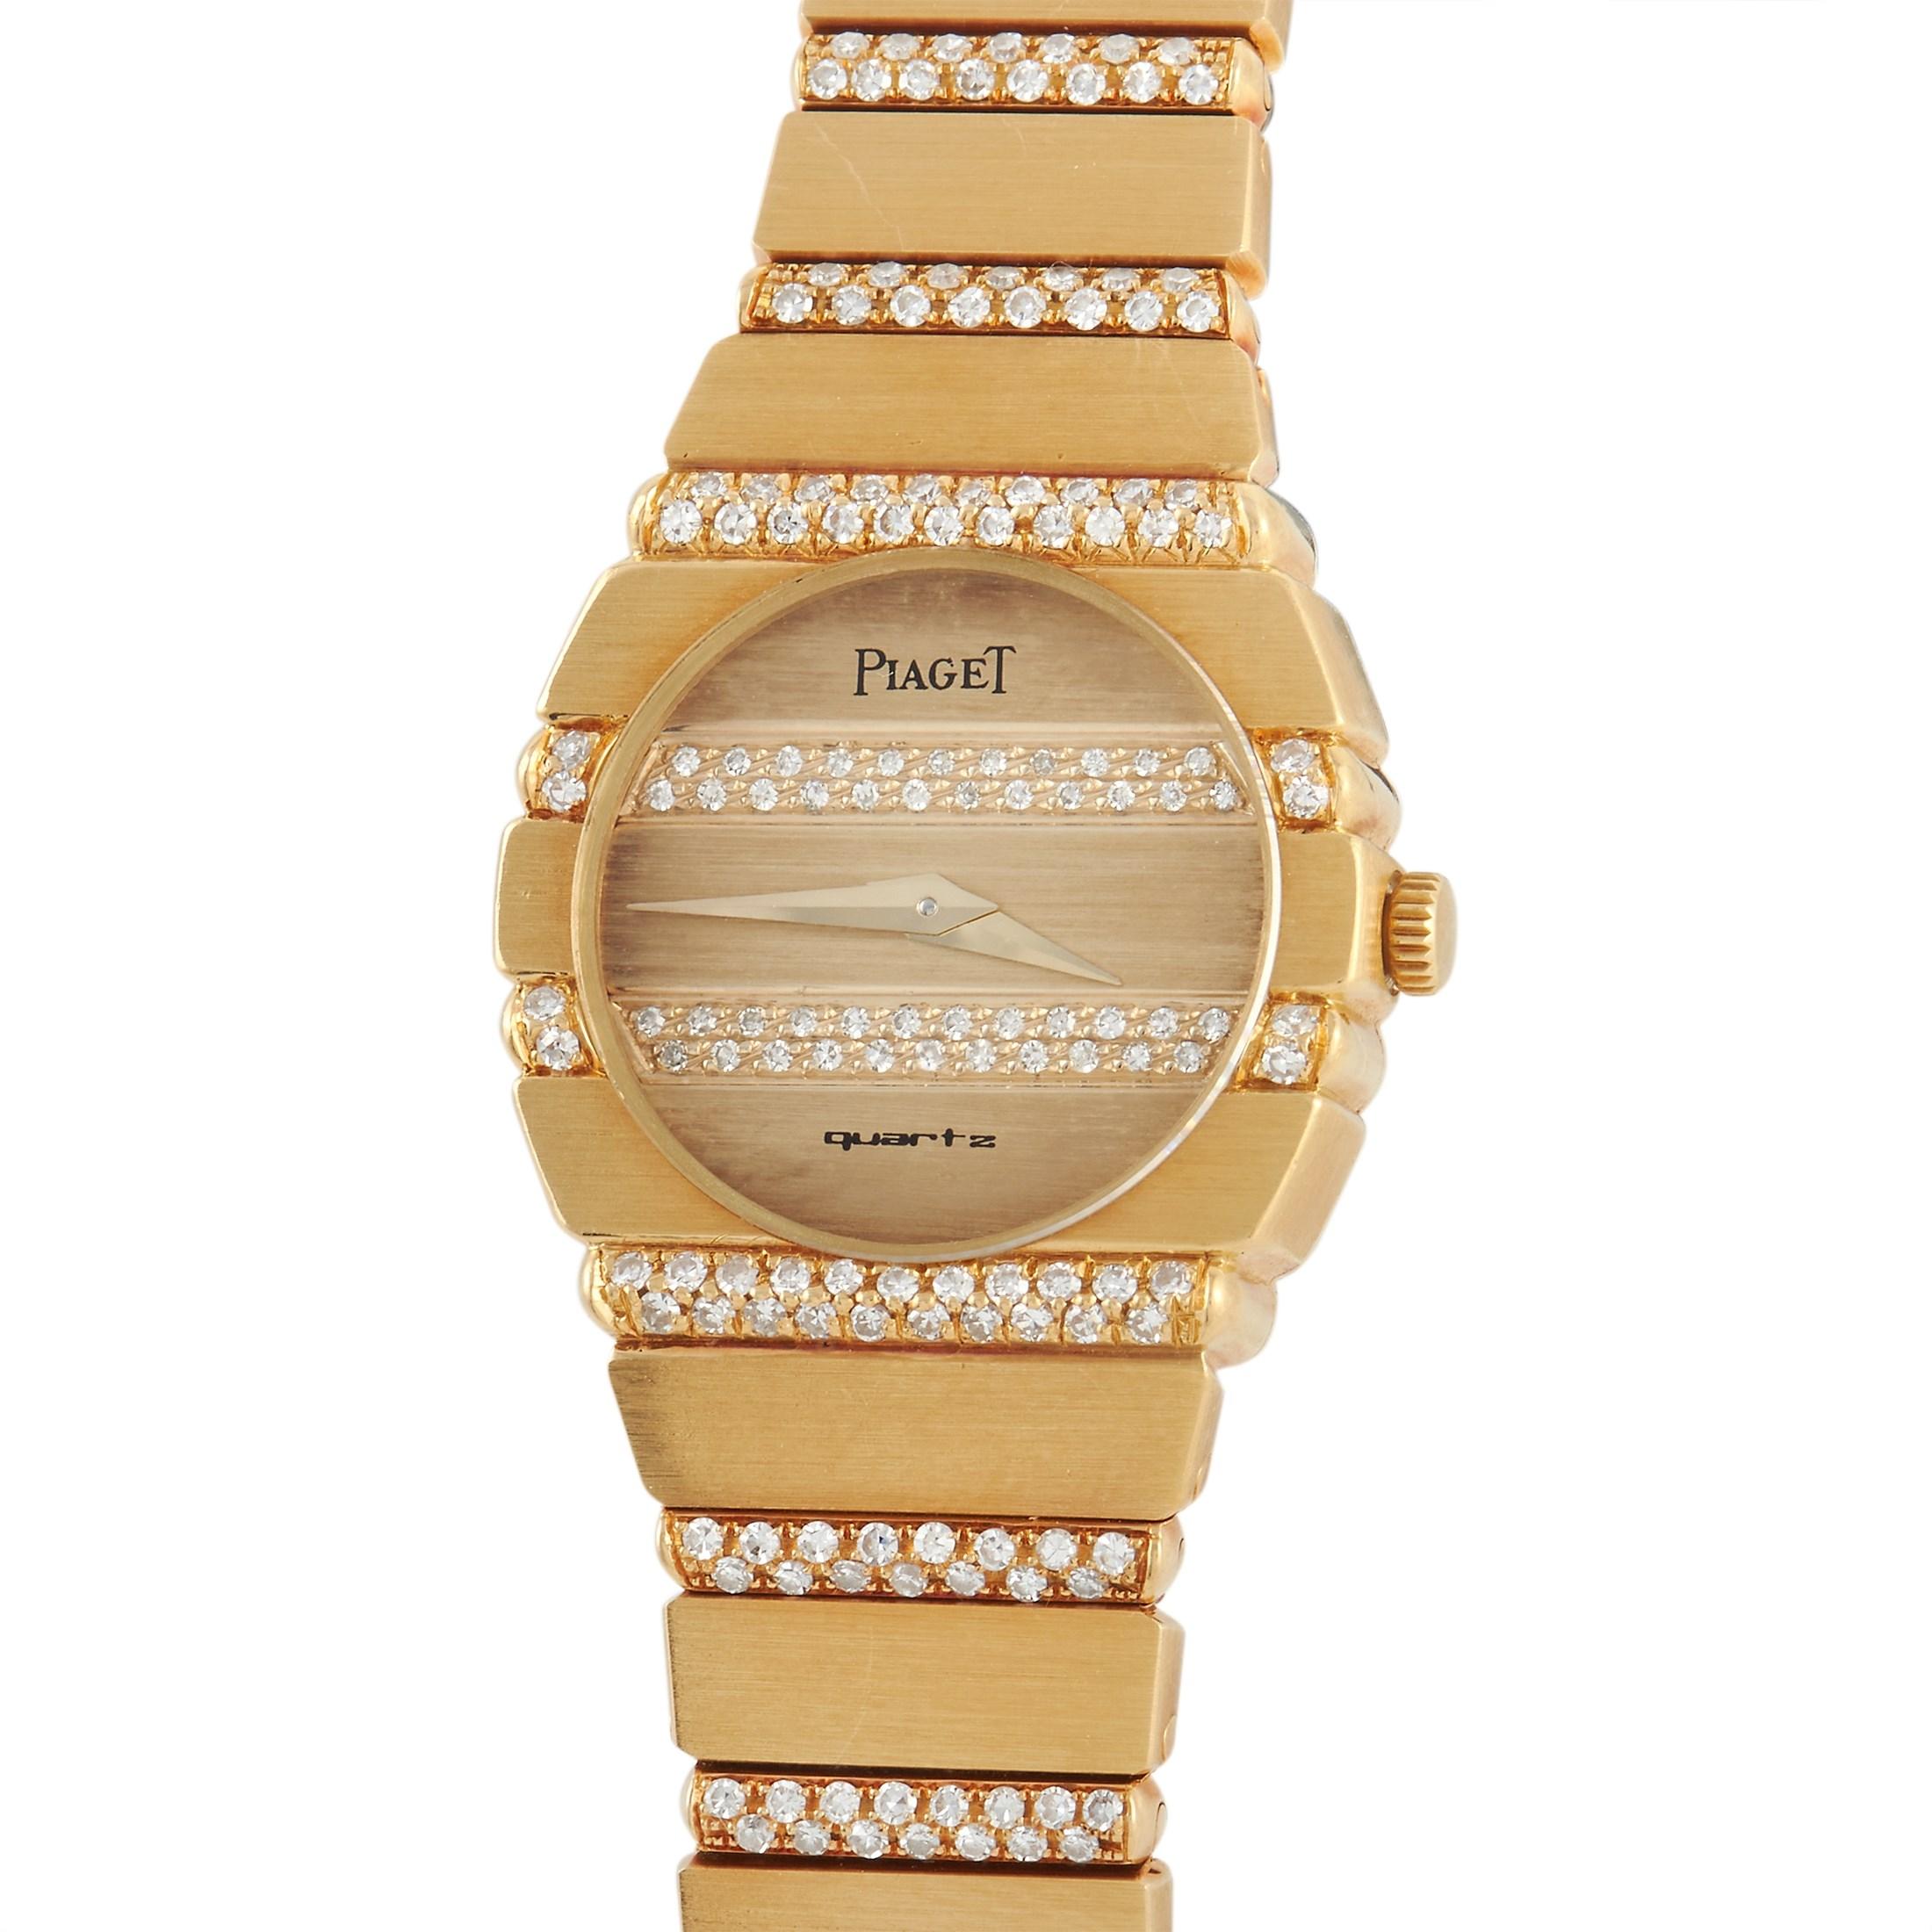 The Piaget Ladies Polo Watch, reference number 861 C 705, is nothing short of breathtaking.

Bold and opulent design, this watch comes to life thanks to the round 24mm case and bracelet crafted from shimmering 18K Yellow Gold. The golden dial